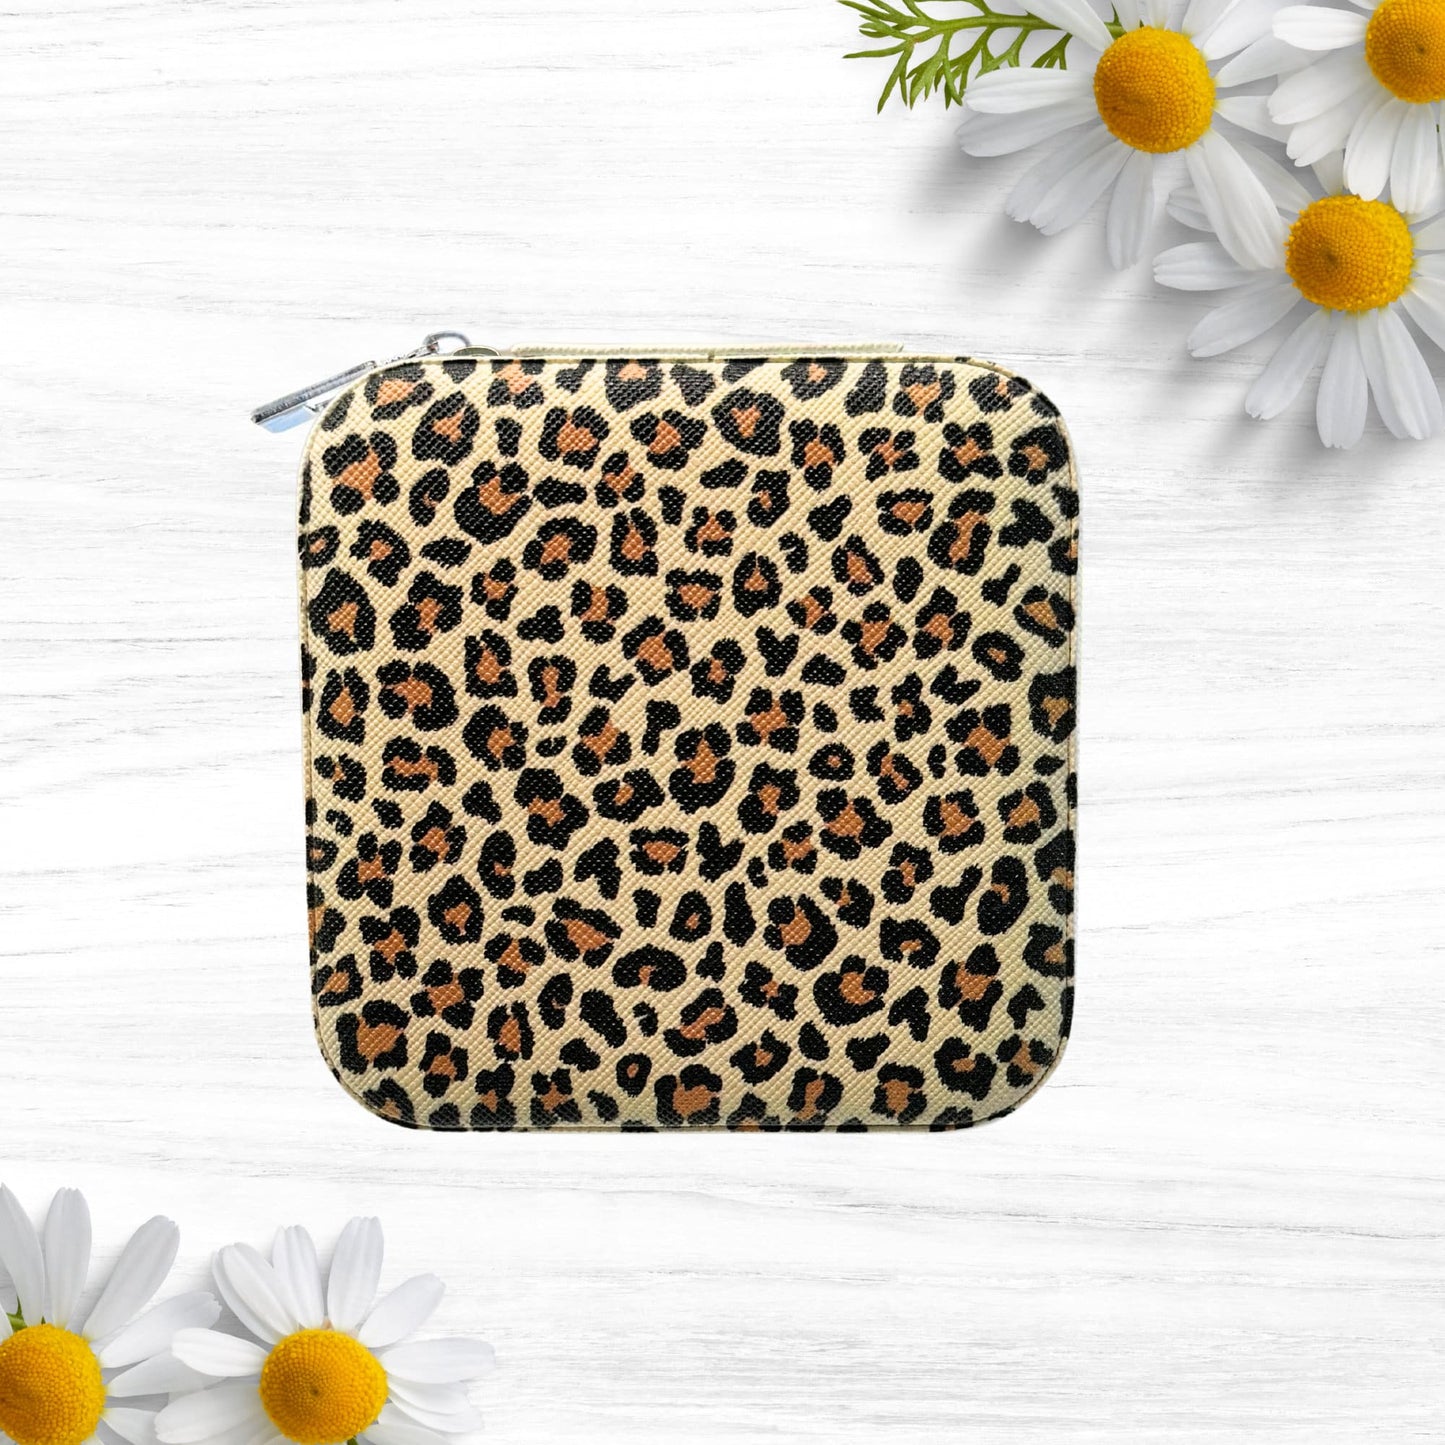 Personalized Travel Jewelry Case, Custom Printed Leopard Pattern Jewelry Box, with or without Name, Bridesmaids Proposal Gift, Traveler gift